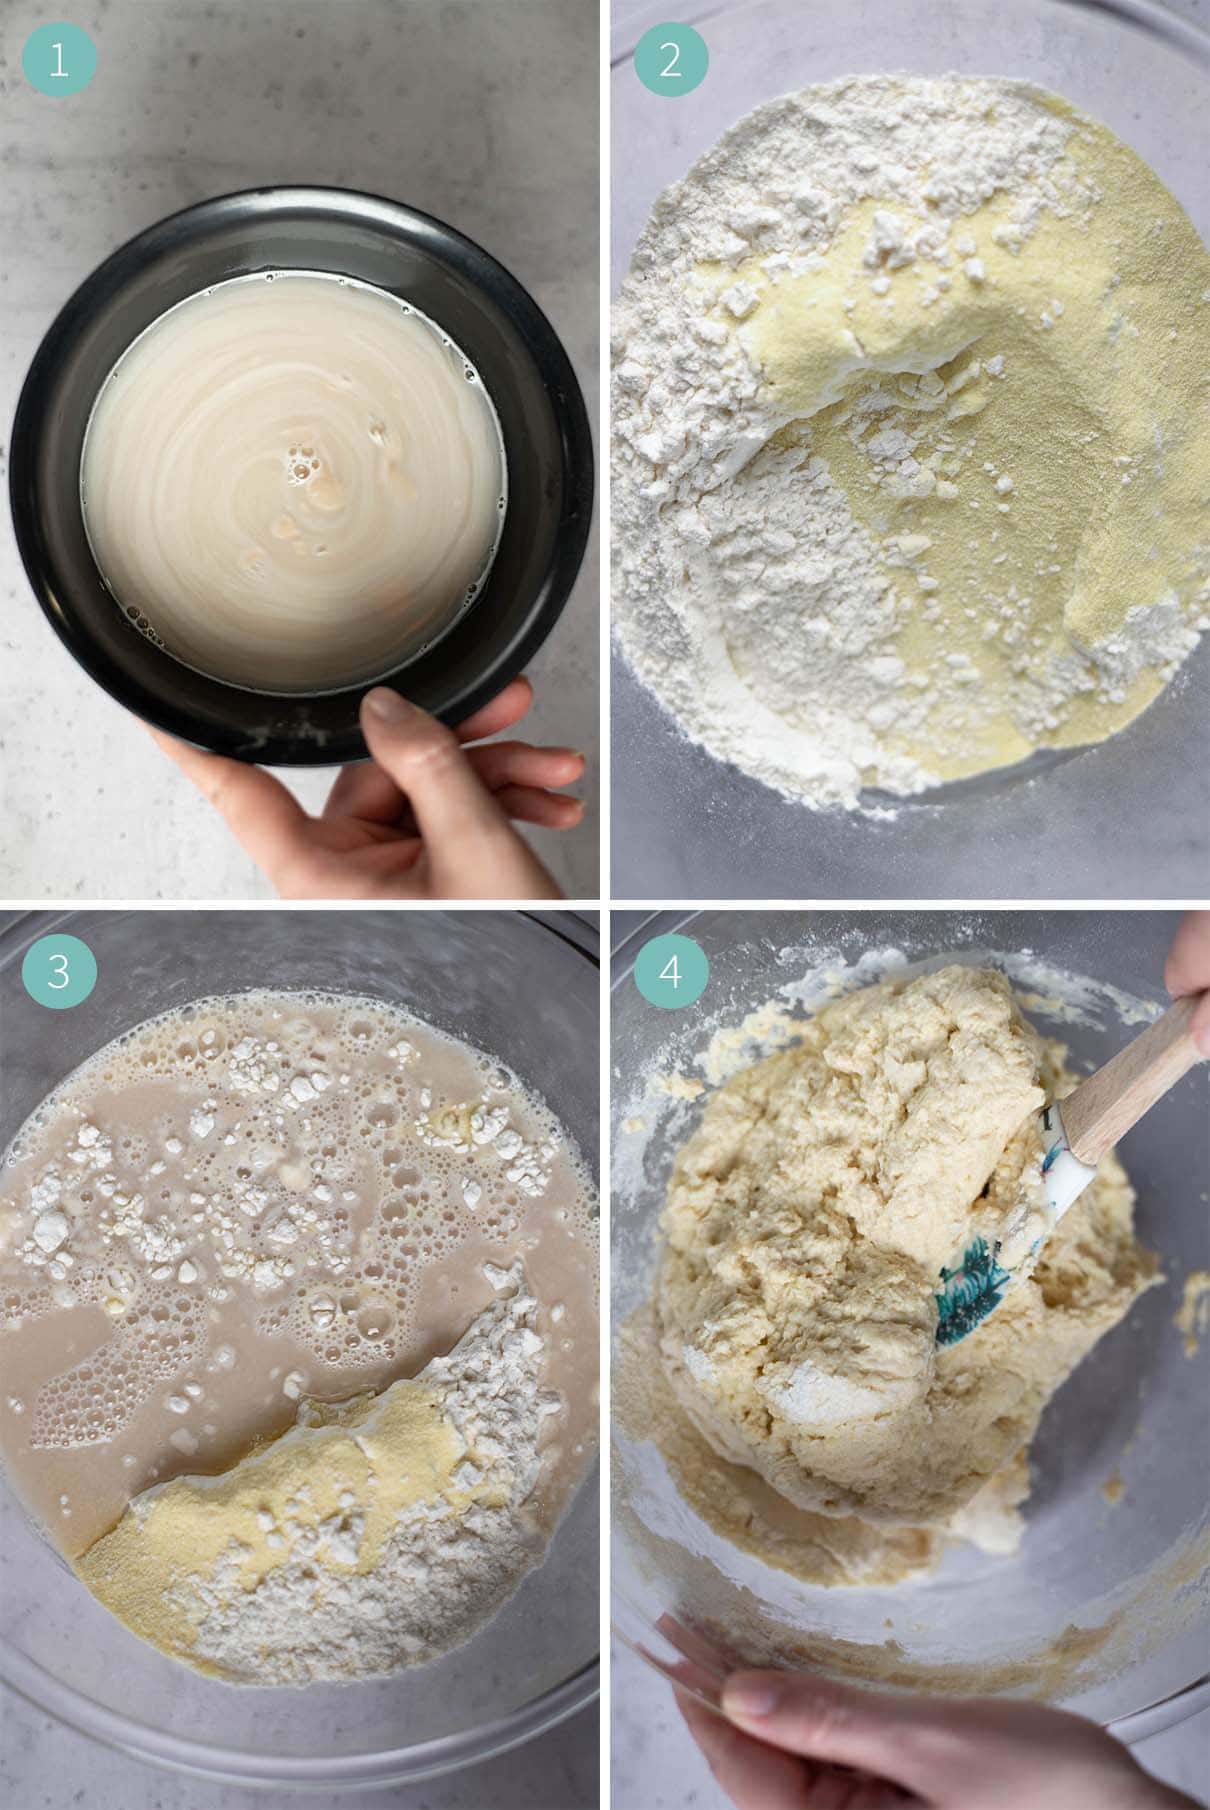 how to make semolina bread - step 1 to 4 in pictures.